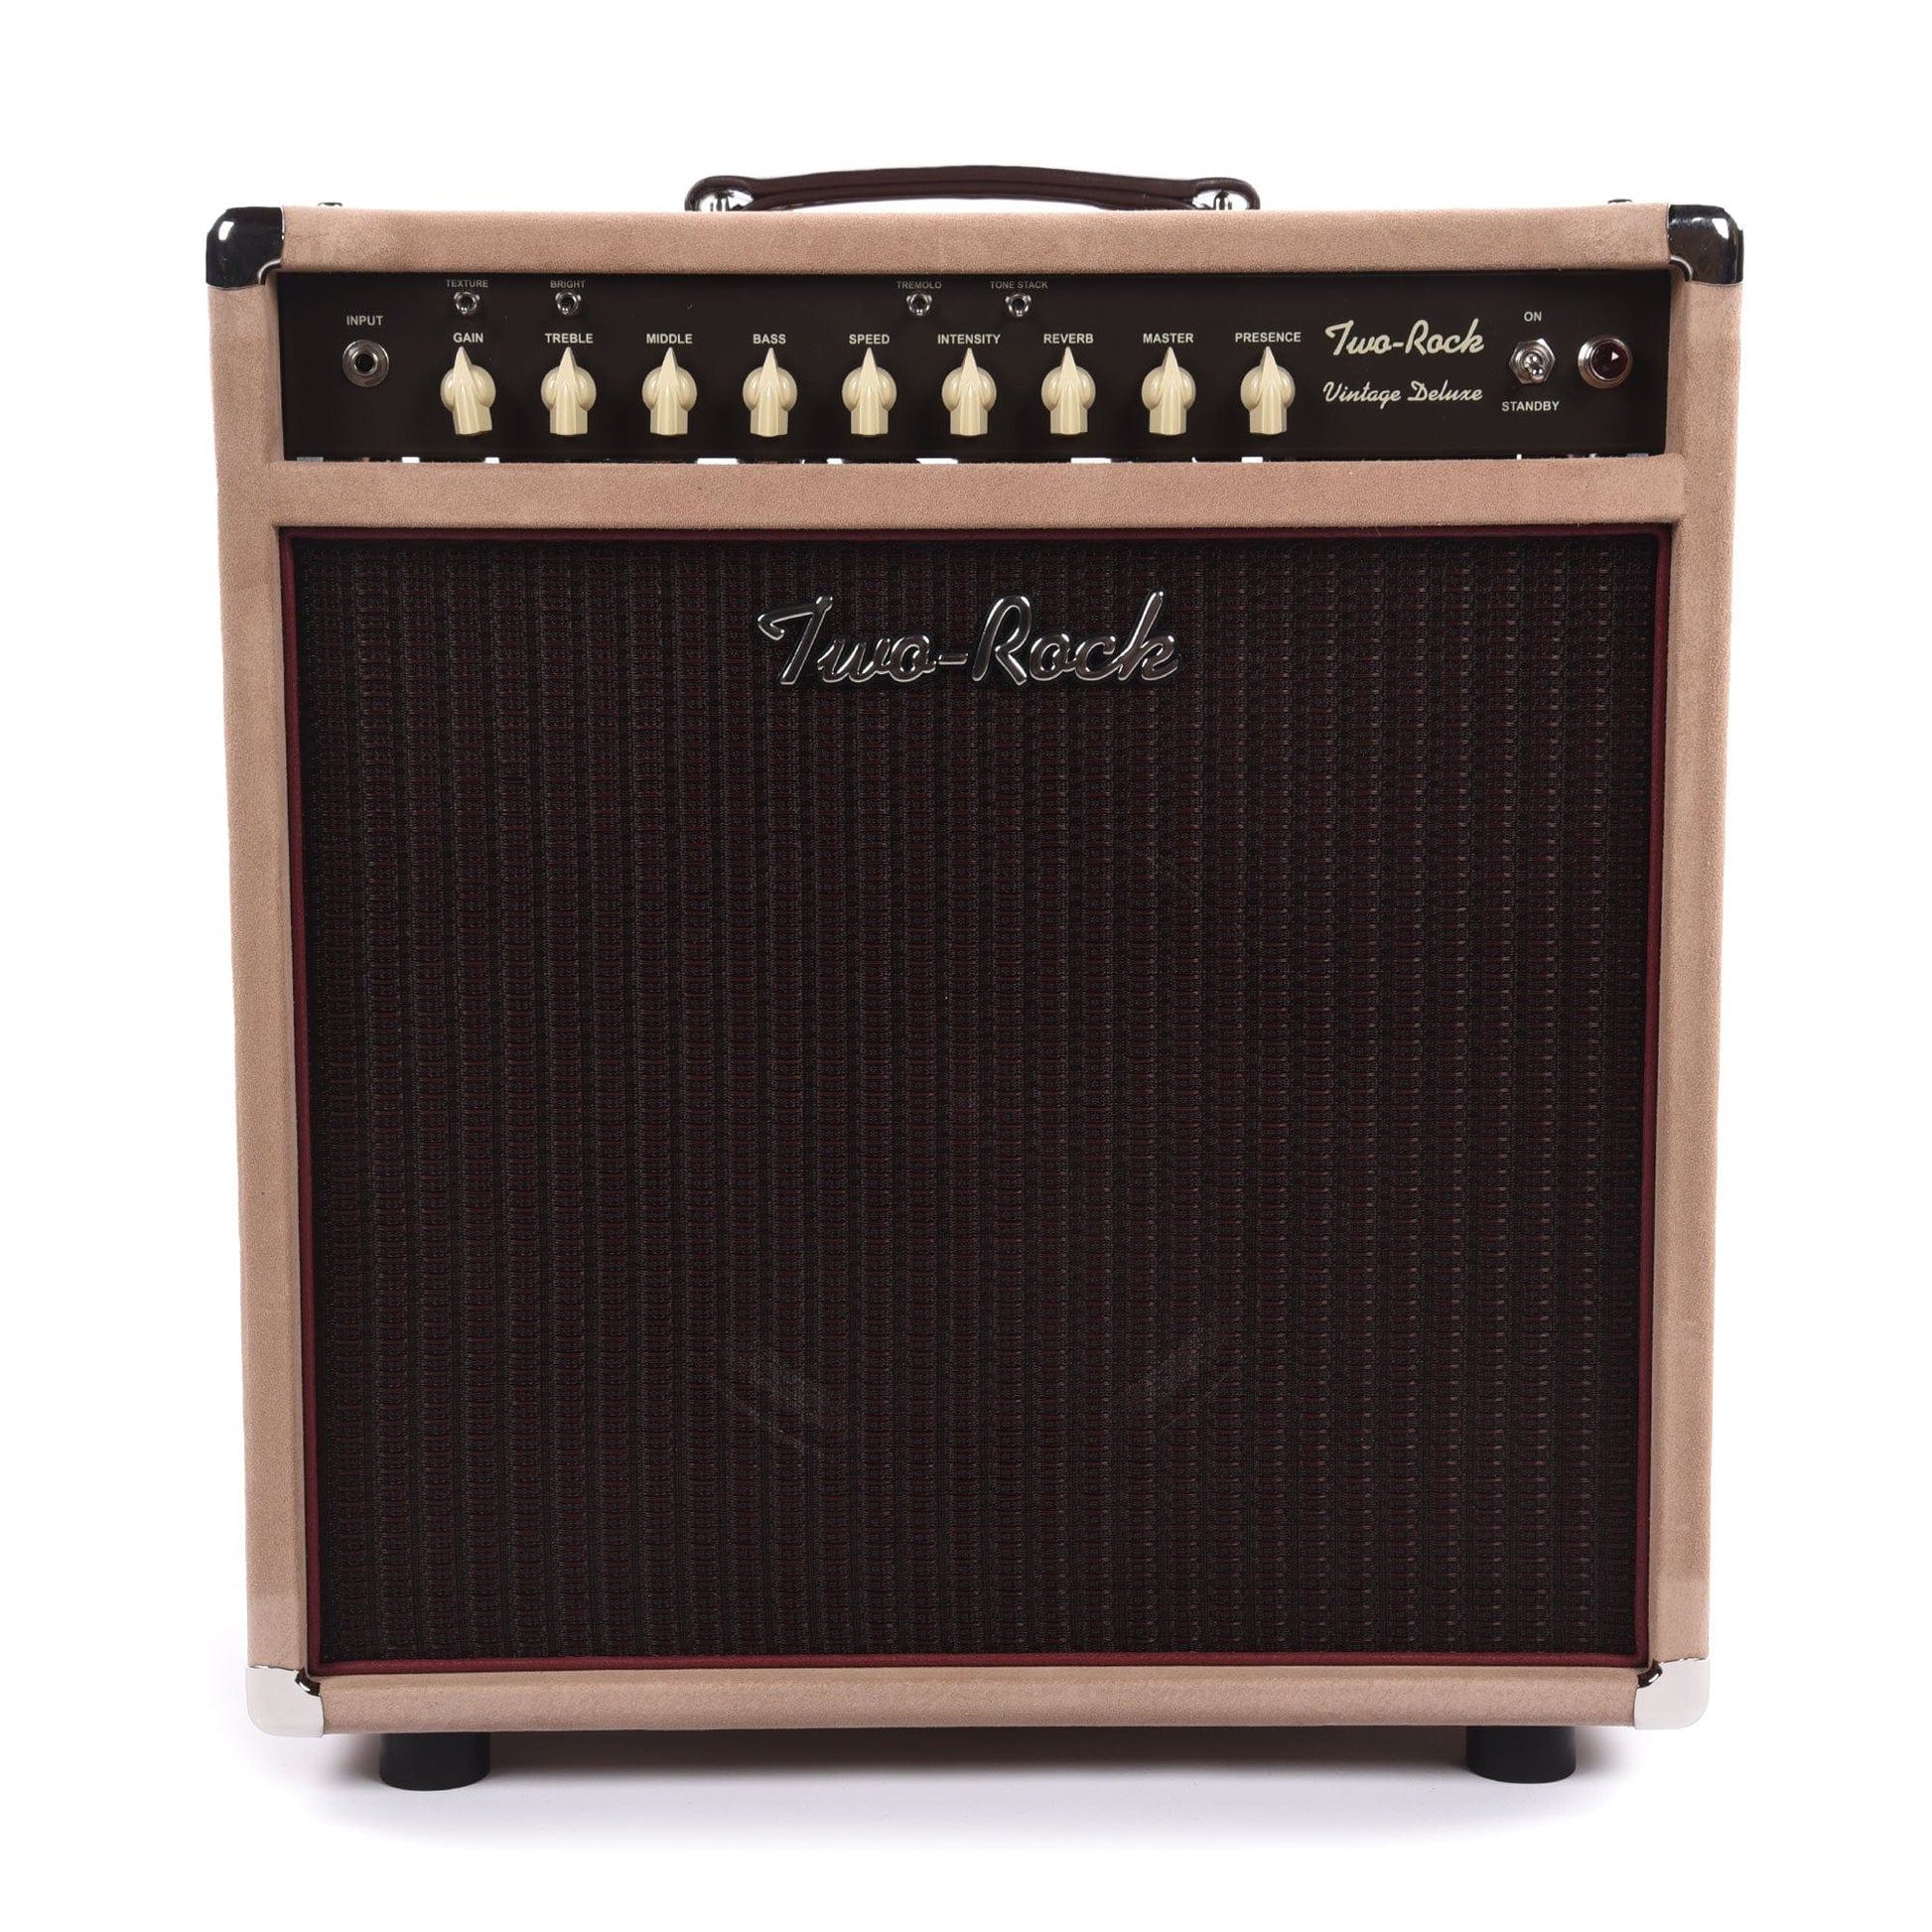 Two Rock Vintage Deluxe 40w 1x12 Combo Dogwood Suede w/ Oxblood Cloth Amps / Guitar Combos